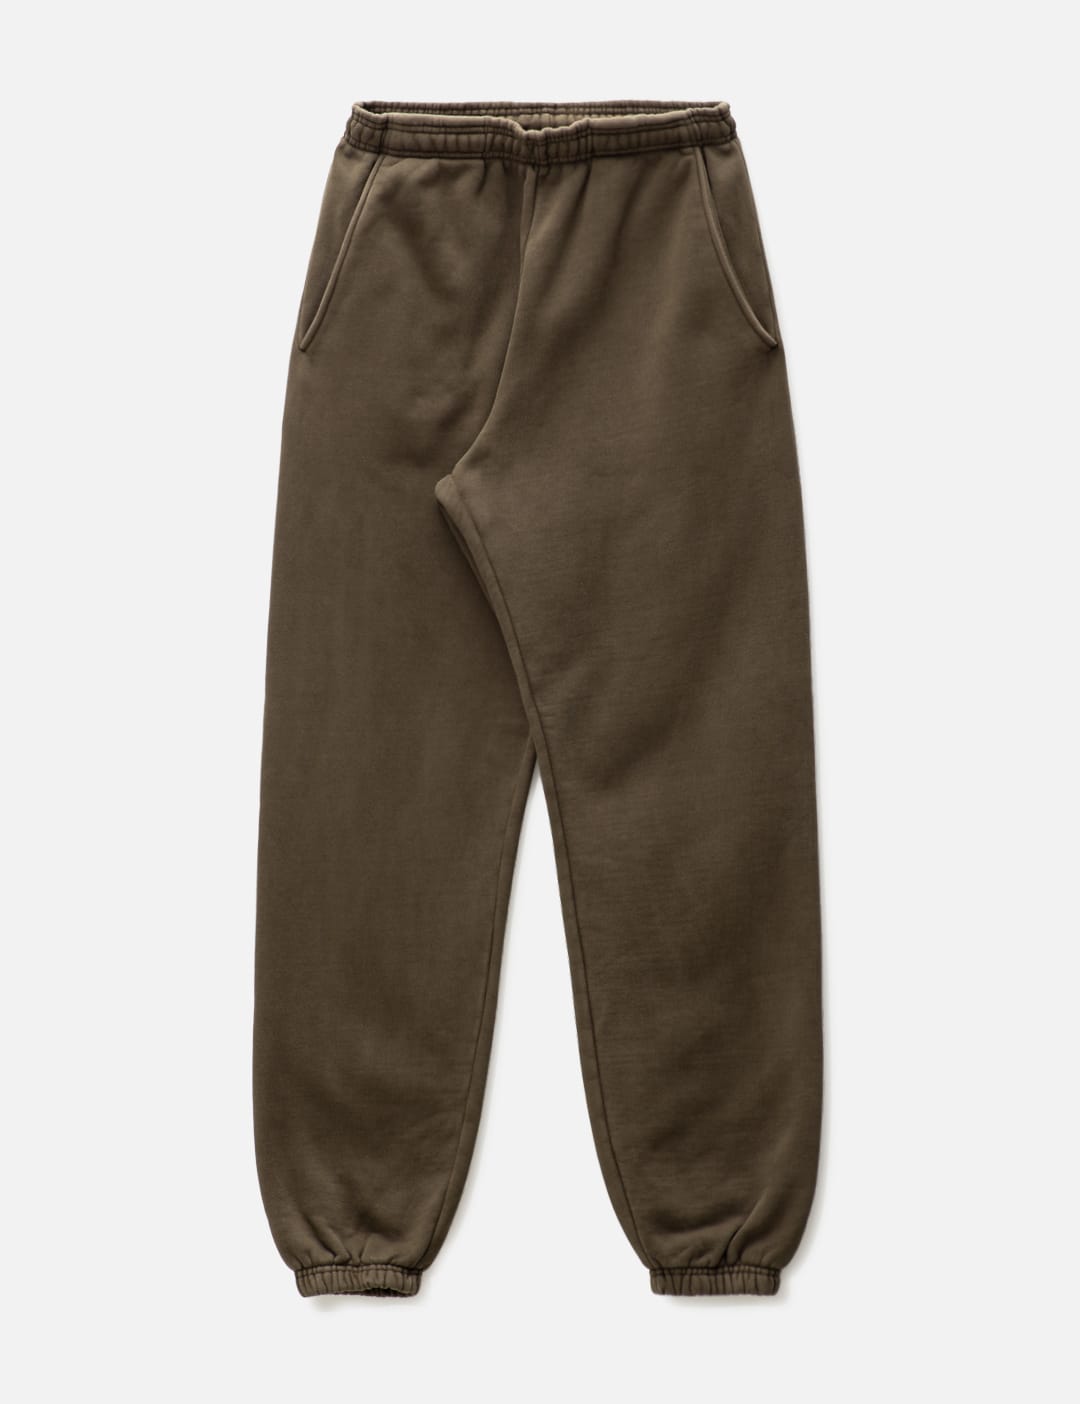 Entire Studios - Heavy Sweatpants | HBX - Globally Curated Fashion and  Lifestyle by Hypebeast